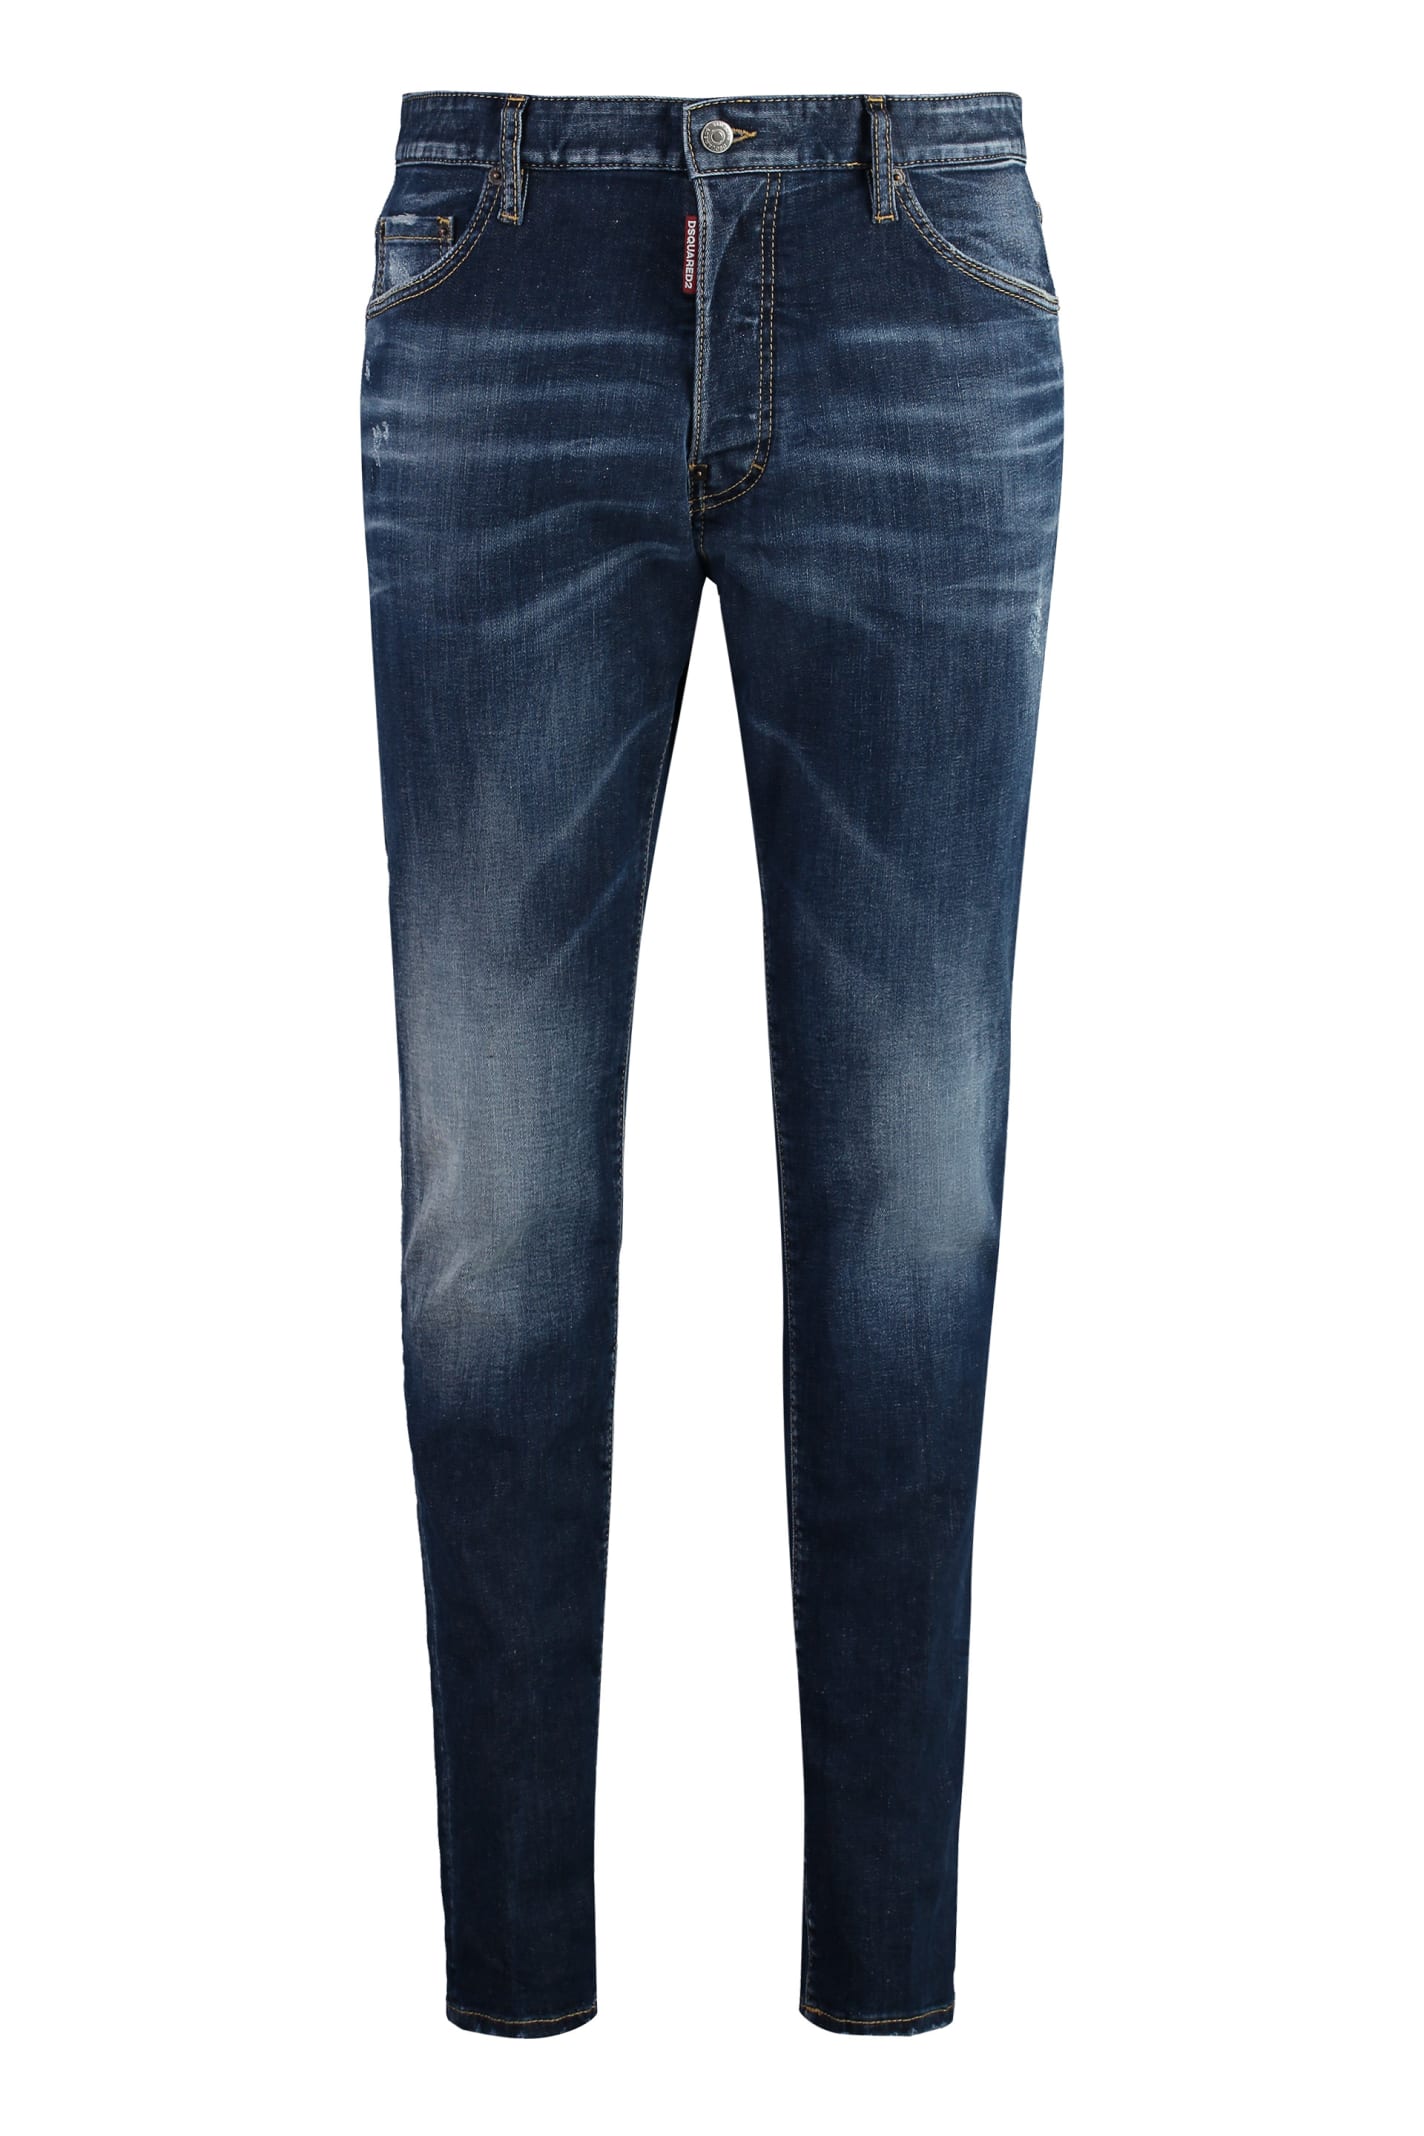 Shop Dsquared2 Cool-guy Jeans